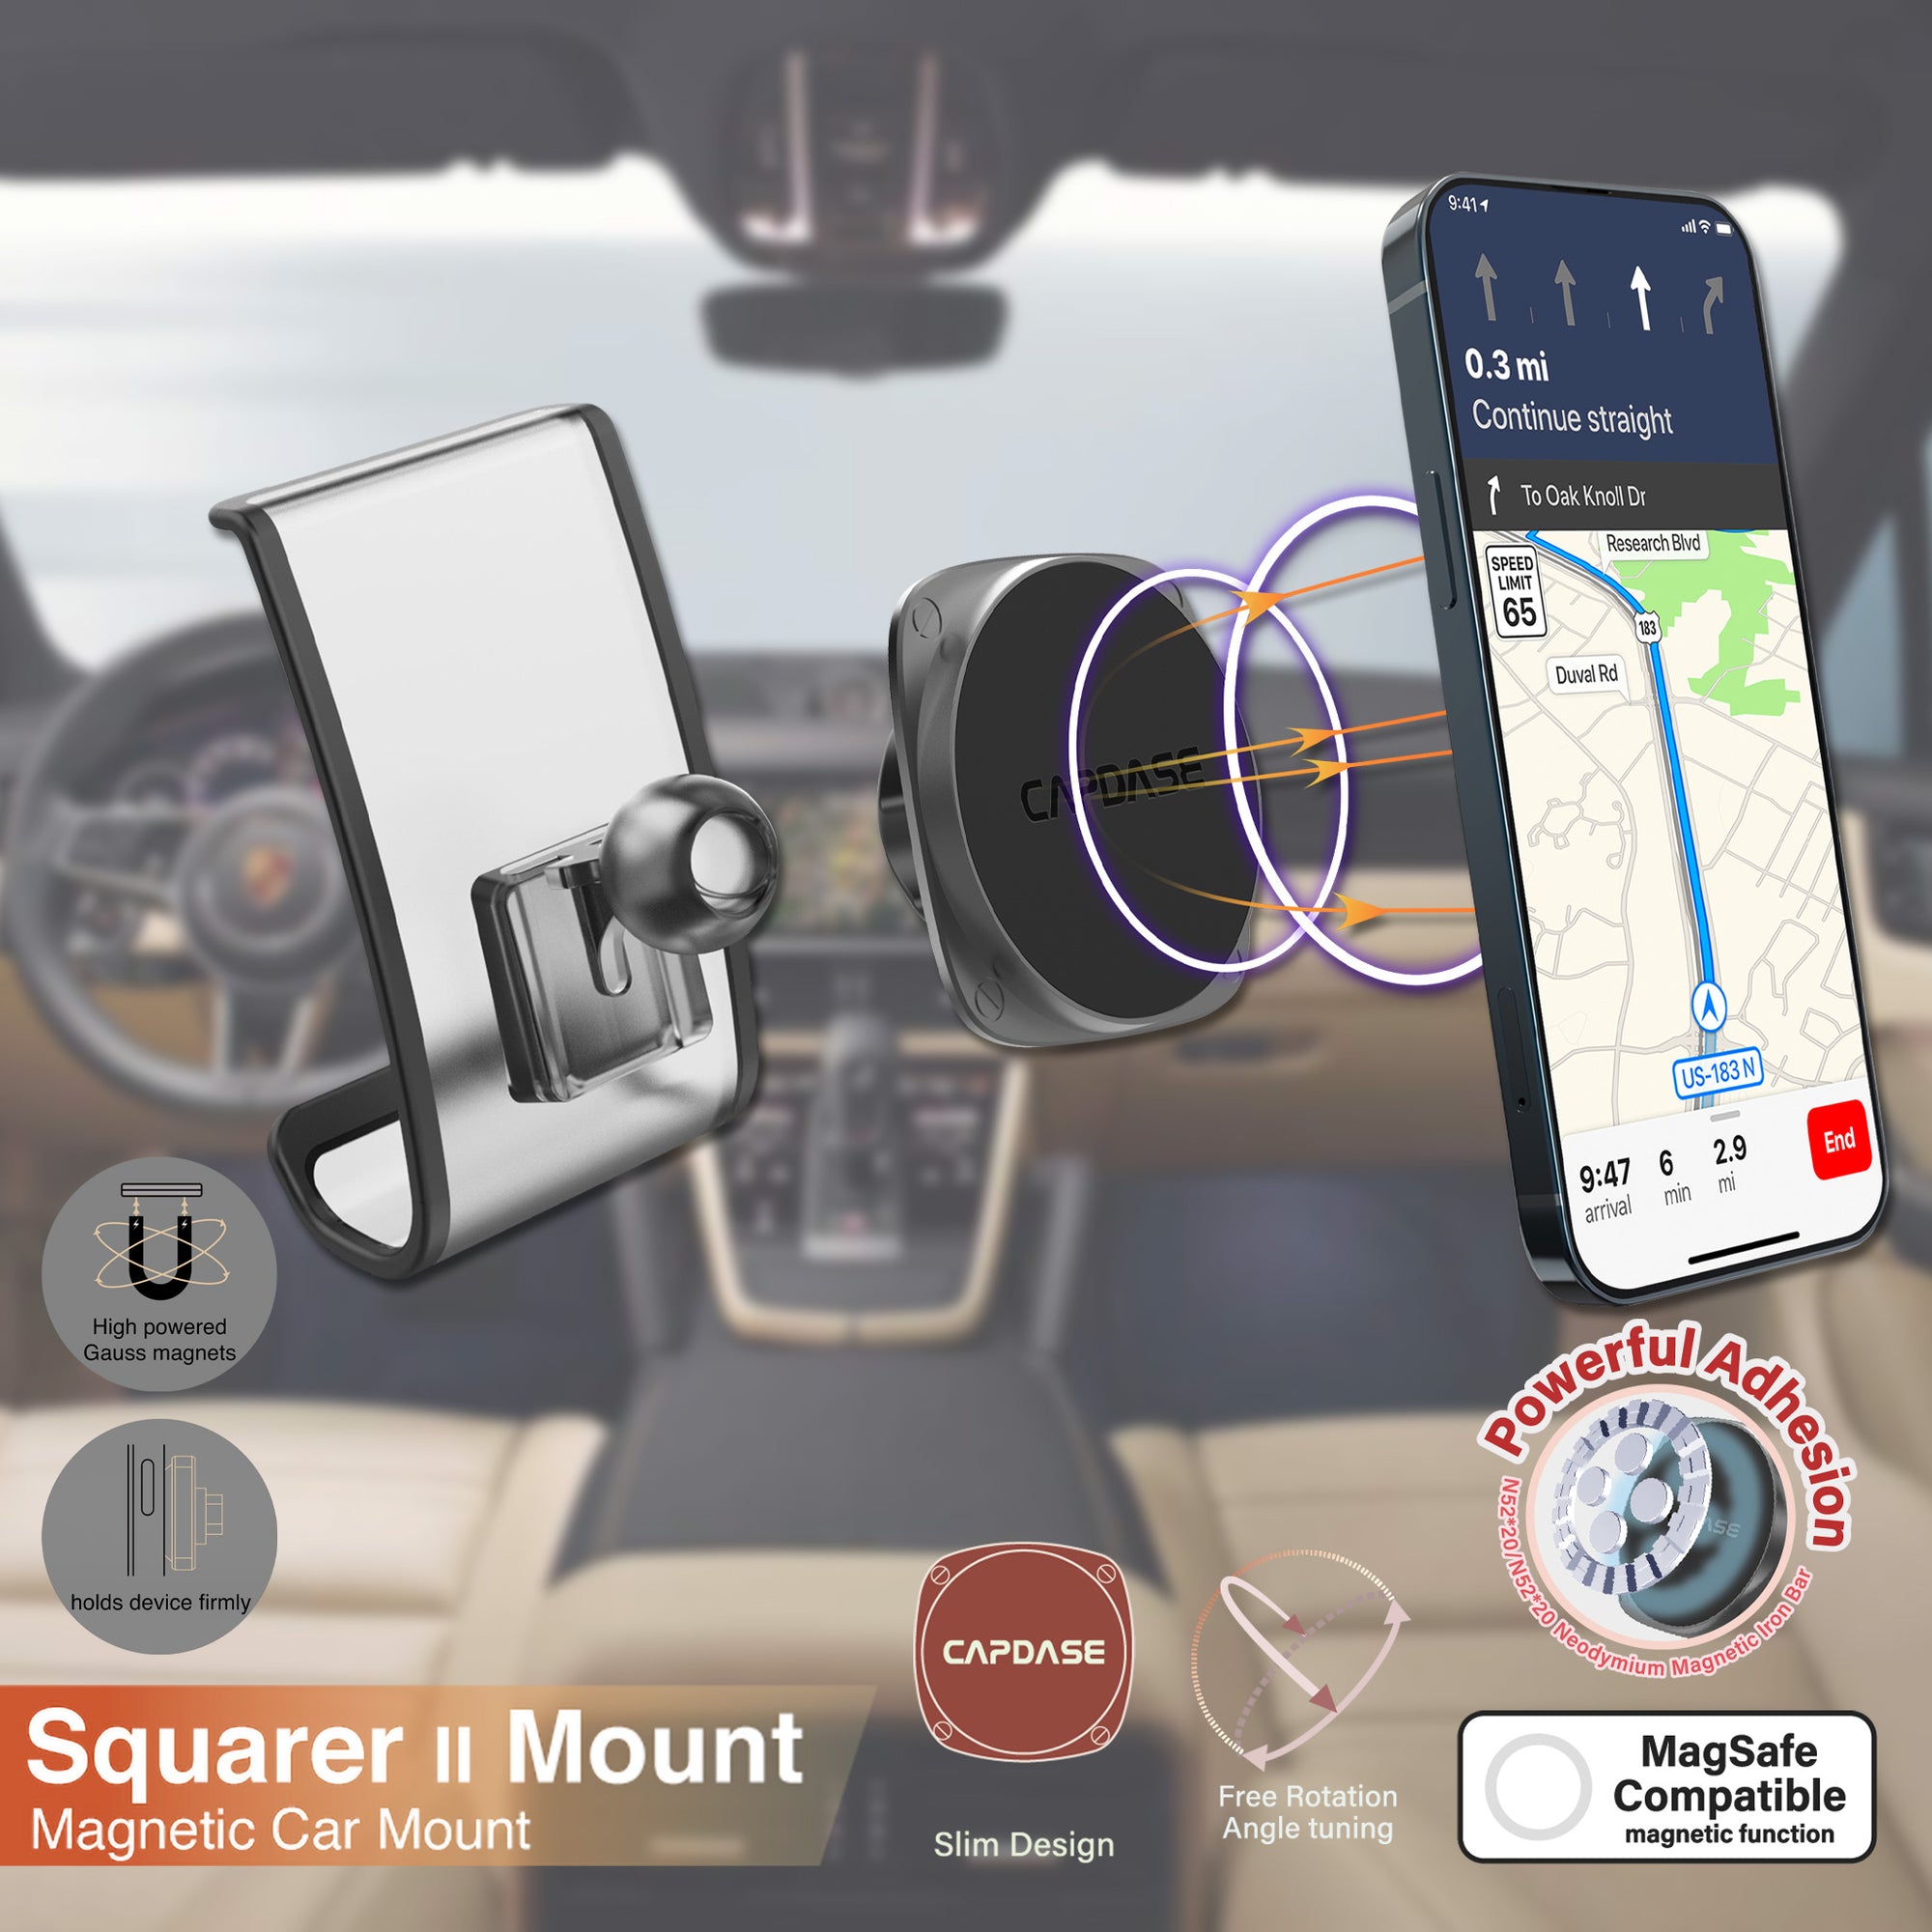 SQUARER II Magnetic Car Mount DBase - Macan for Porsche MACAN (2014-2020)